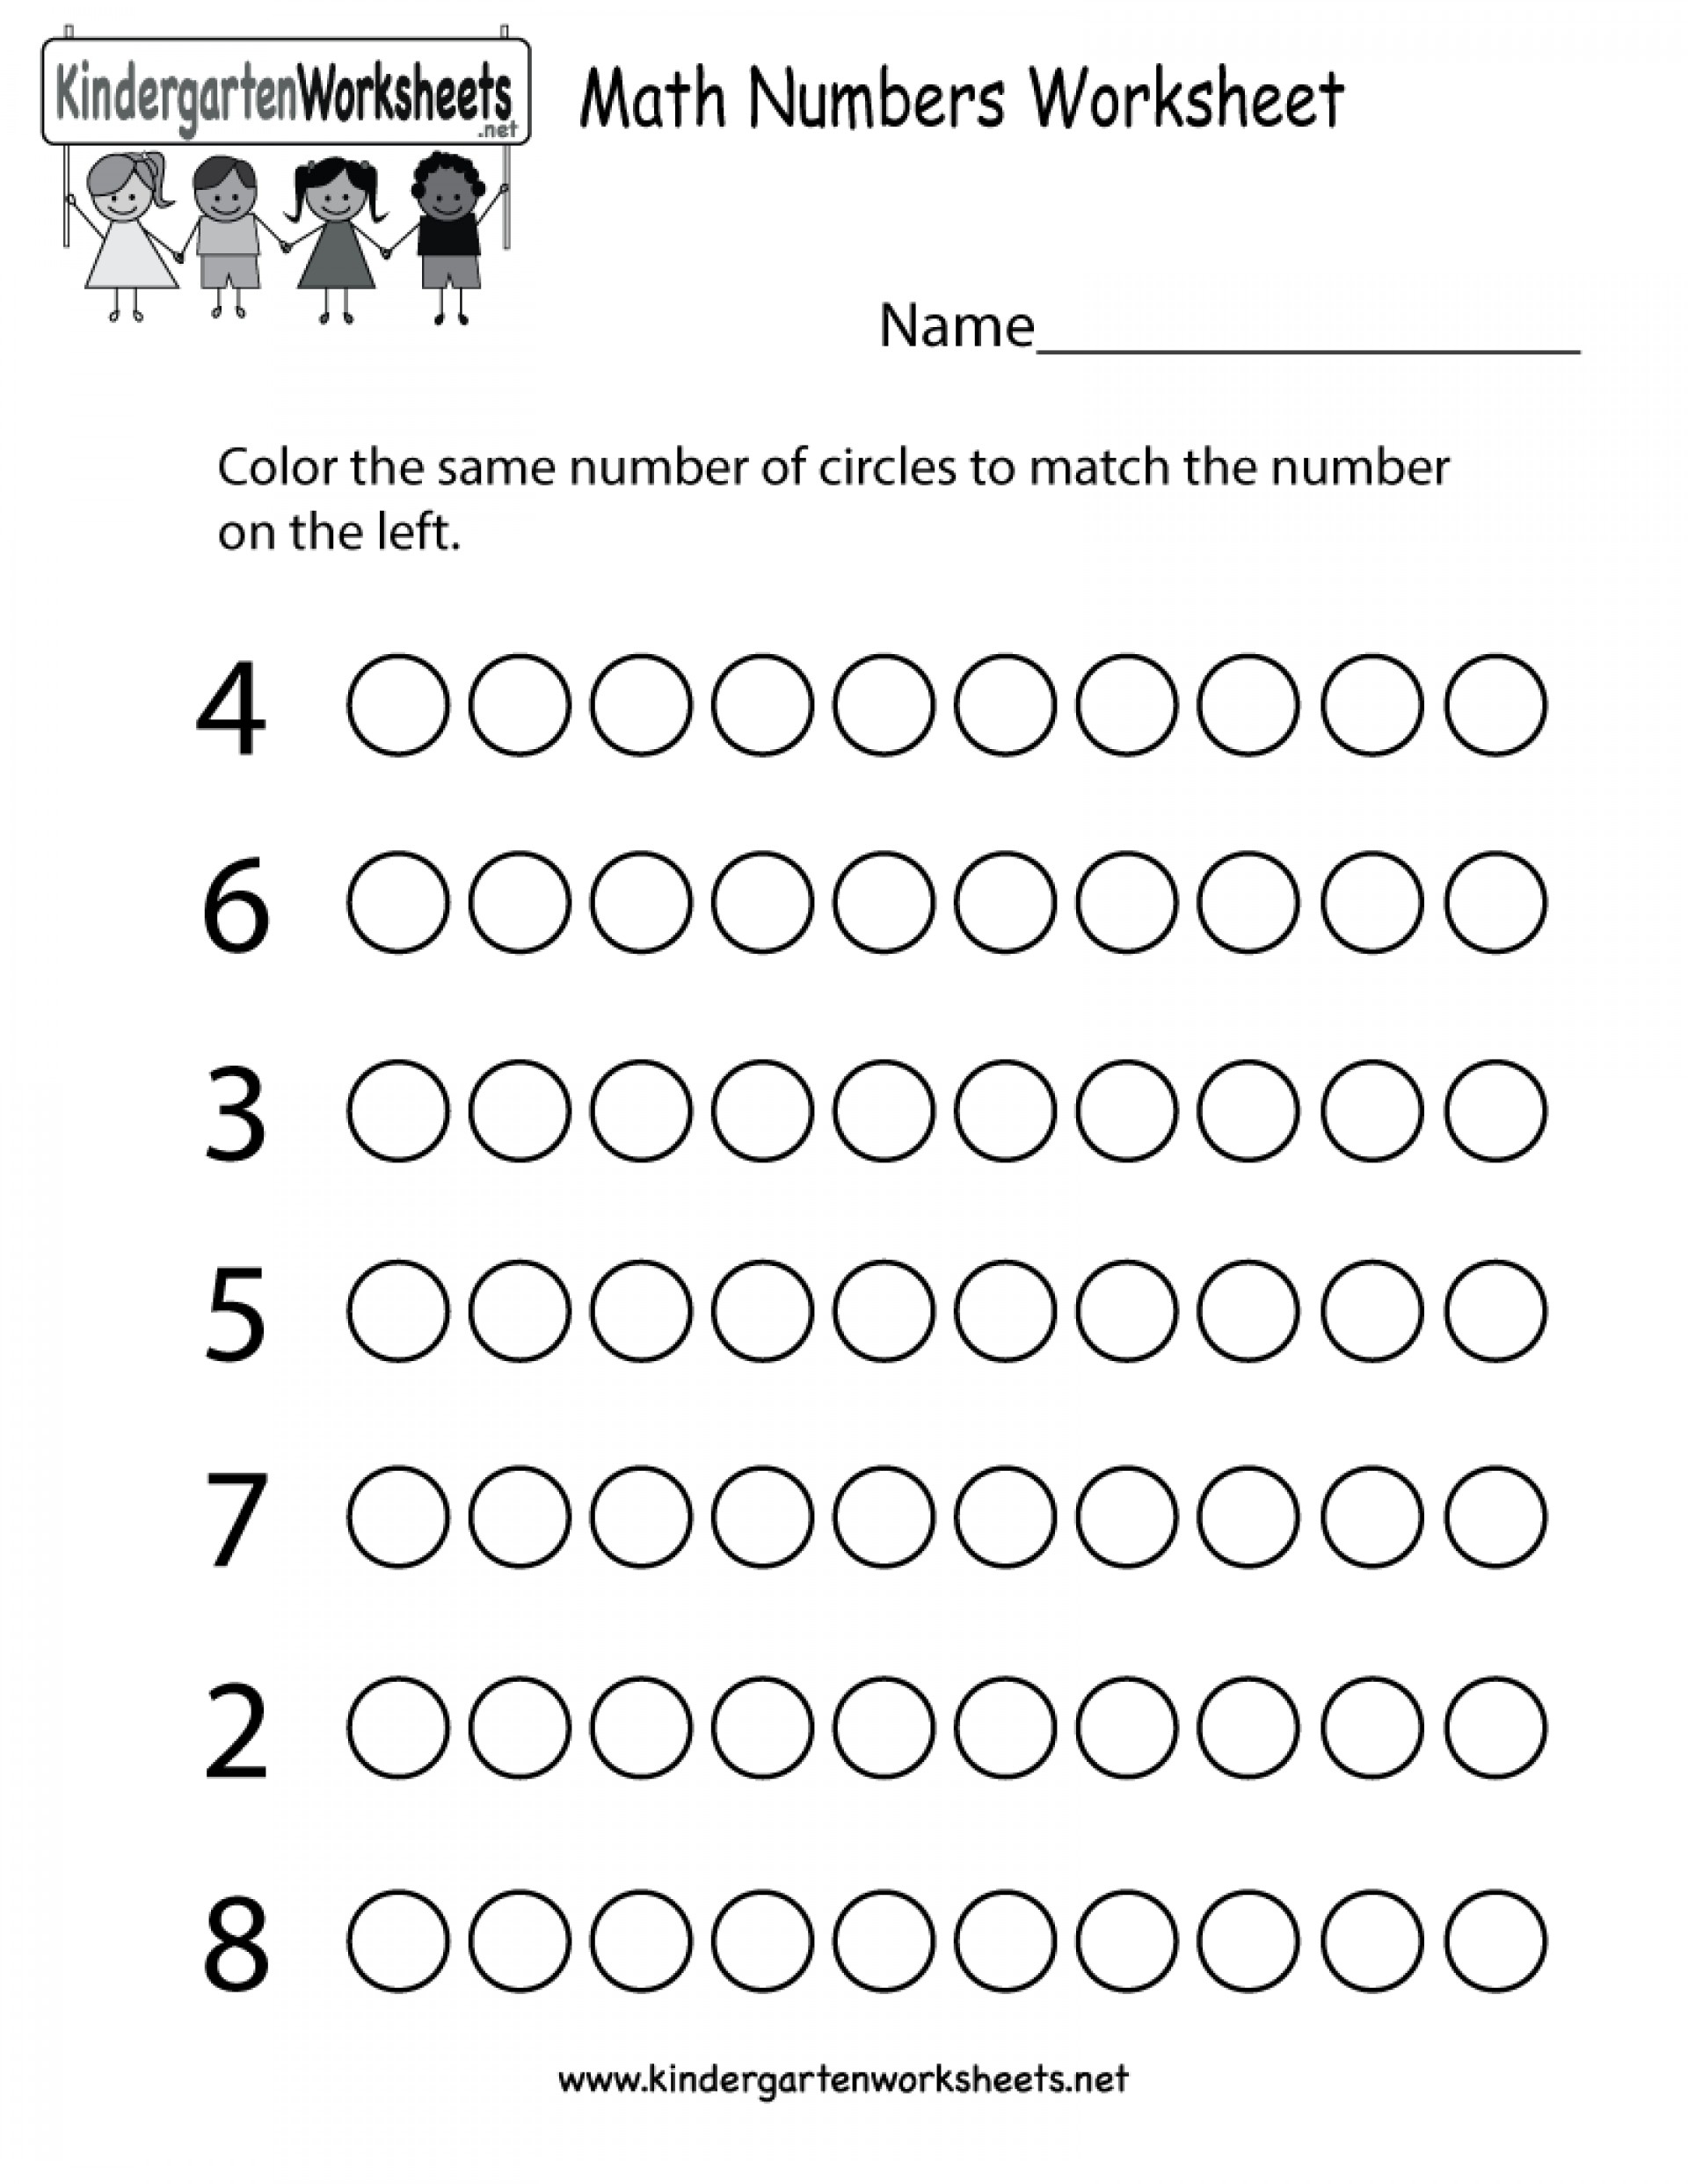 Math Worksheets Pre K Unique Prek Addition Counting Db excel